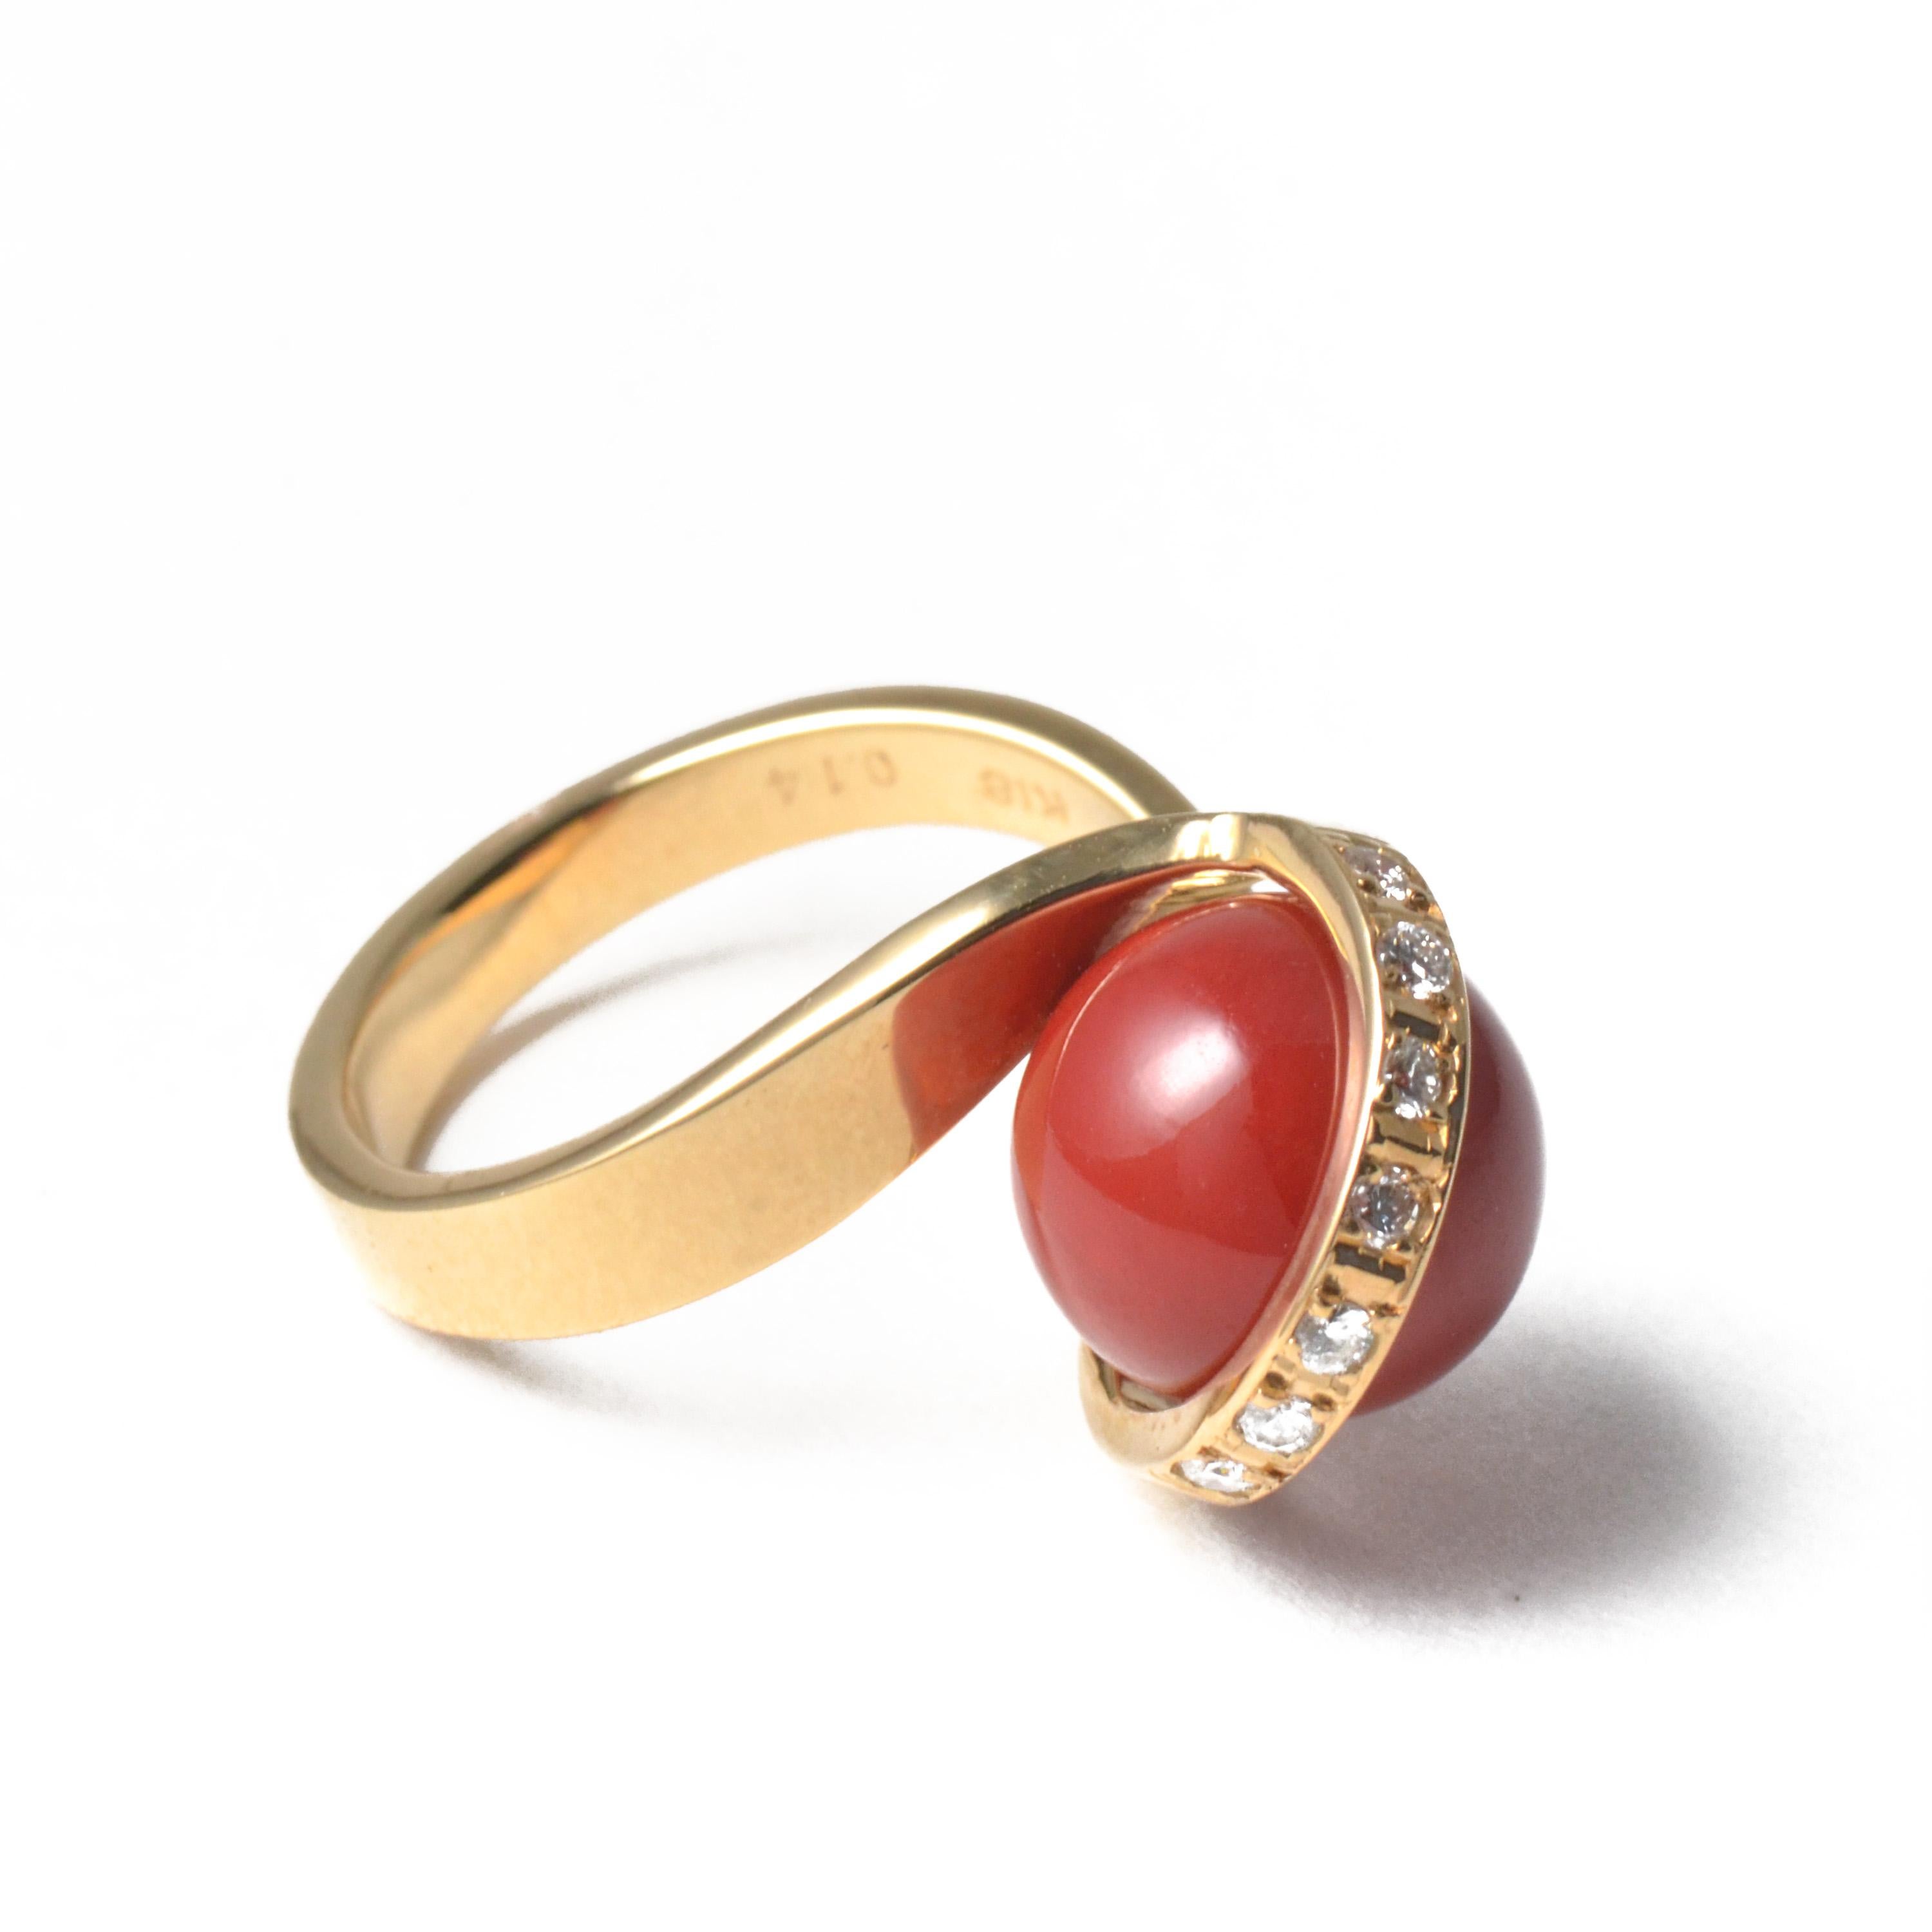 Vintage ring crafted in 18 karat yellow gold with Chiaka Sango (Oxblood Coral). The bead is approx. 10.5mm and the diamonds are 0.14carats. The 18 karat yellow gold setting exposes as much of the bead as possible to show off its flawless surface and